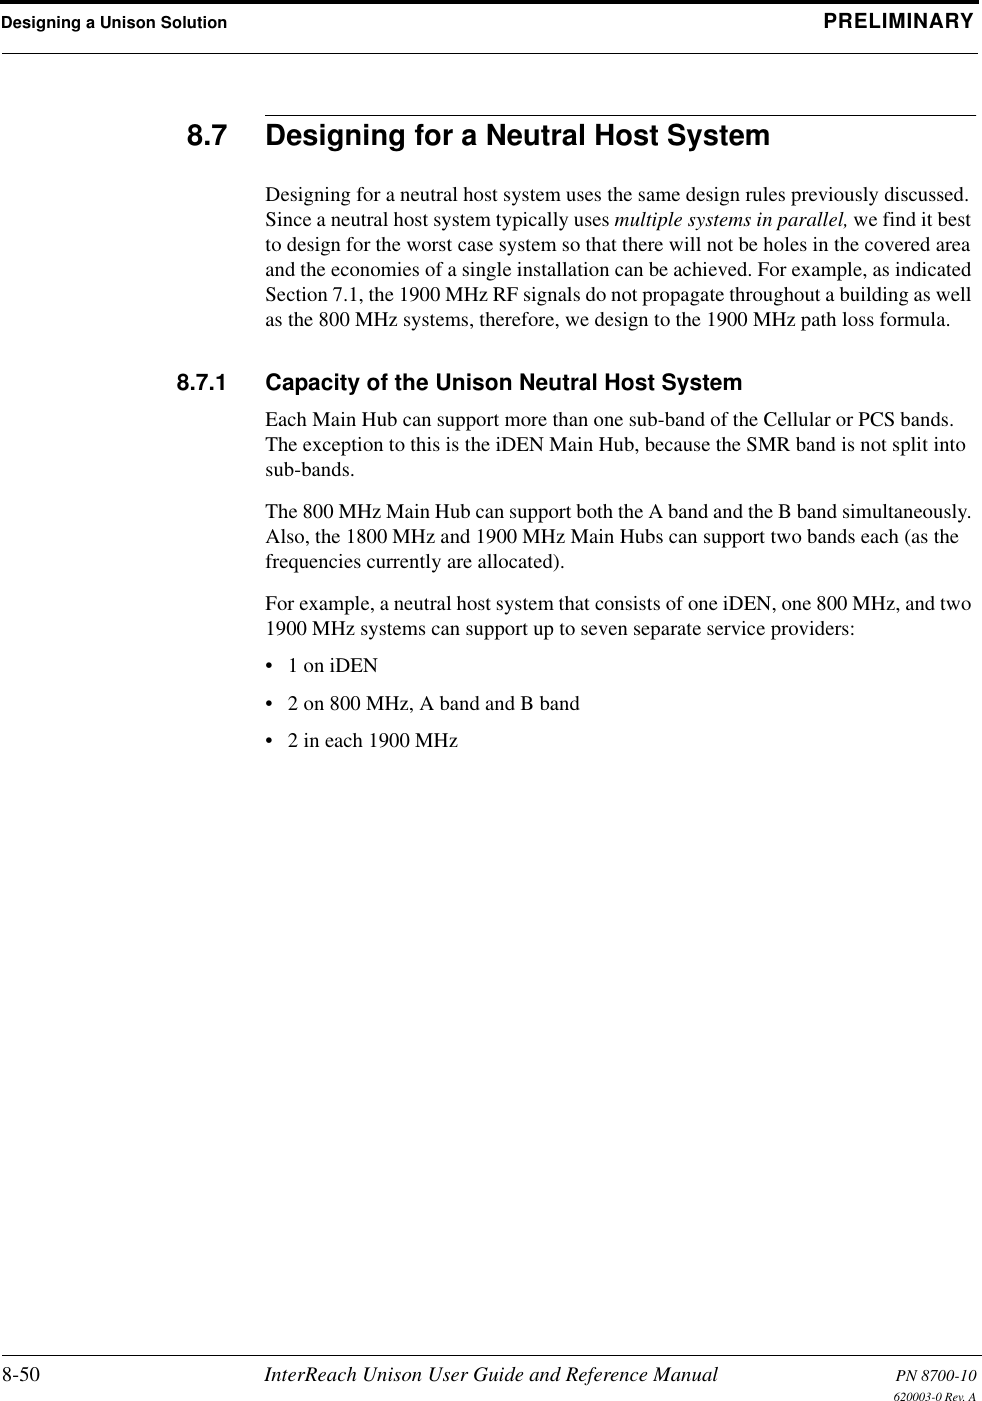 Designing a Unison Solution PRELIMINARY8-50 InterReach Unison User Guide and Reference Manual PN 8700-10620003-0 Rev. A8.7 Designing for a Neutral Host SystemDesigning for a neutral host system uses the same design rules previously discussed. Since a neutral host system typically uses multiple systems in parallel, we find it best to design for the worst case system so that there will not be holes in the covered area and the economies of a single installation can be achieved. For example, as indicated Section 7.1, the 1900 MHz RF signals do not propagate throughout a building as well as the 800 MHz systems, therefore, we design to the 1900 MHz path loss formula.8.7.1 Capacity of the Unison Neutral Host SystemEach Main Hub can support more than one sub-band of the Cellular or PCS bands. The exception to this is the iDEN Main Hub, because the SMR band is not split into sub-bands.The 800 MHz Main Hub can support both the A band and the B band simultaneously. Also, the 1800 MHz and 1900 MHz Main Hubs can support two bands each (as the frequencies currently are allocated).For example, a neutral host system that consists of one iDEN, one 800 MHz, and two 1900 MHz systems can support up to seven separate service providers:•1 on iDEN• 2 on 800 MHz, A band and B band• 2 in each 1900 MHz